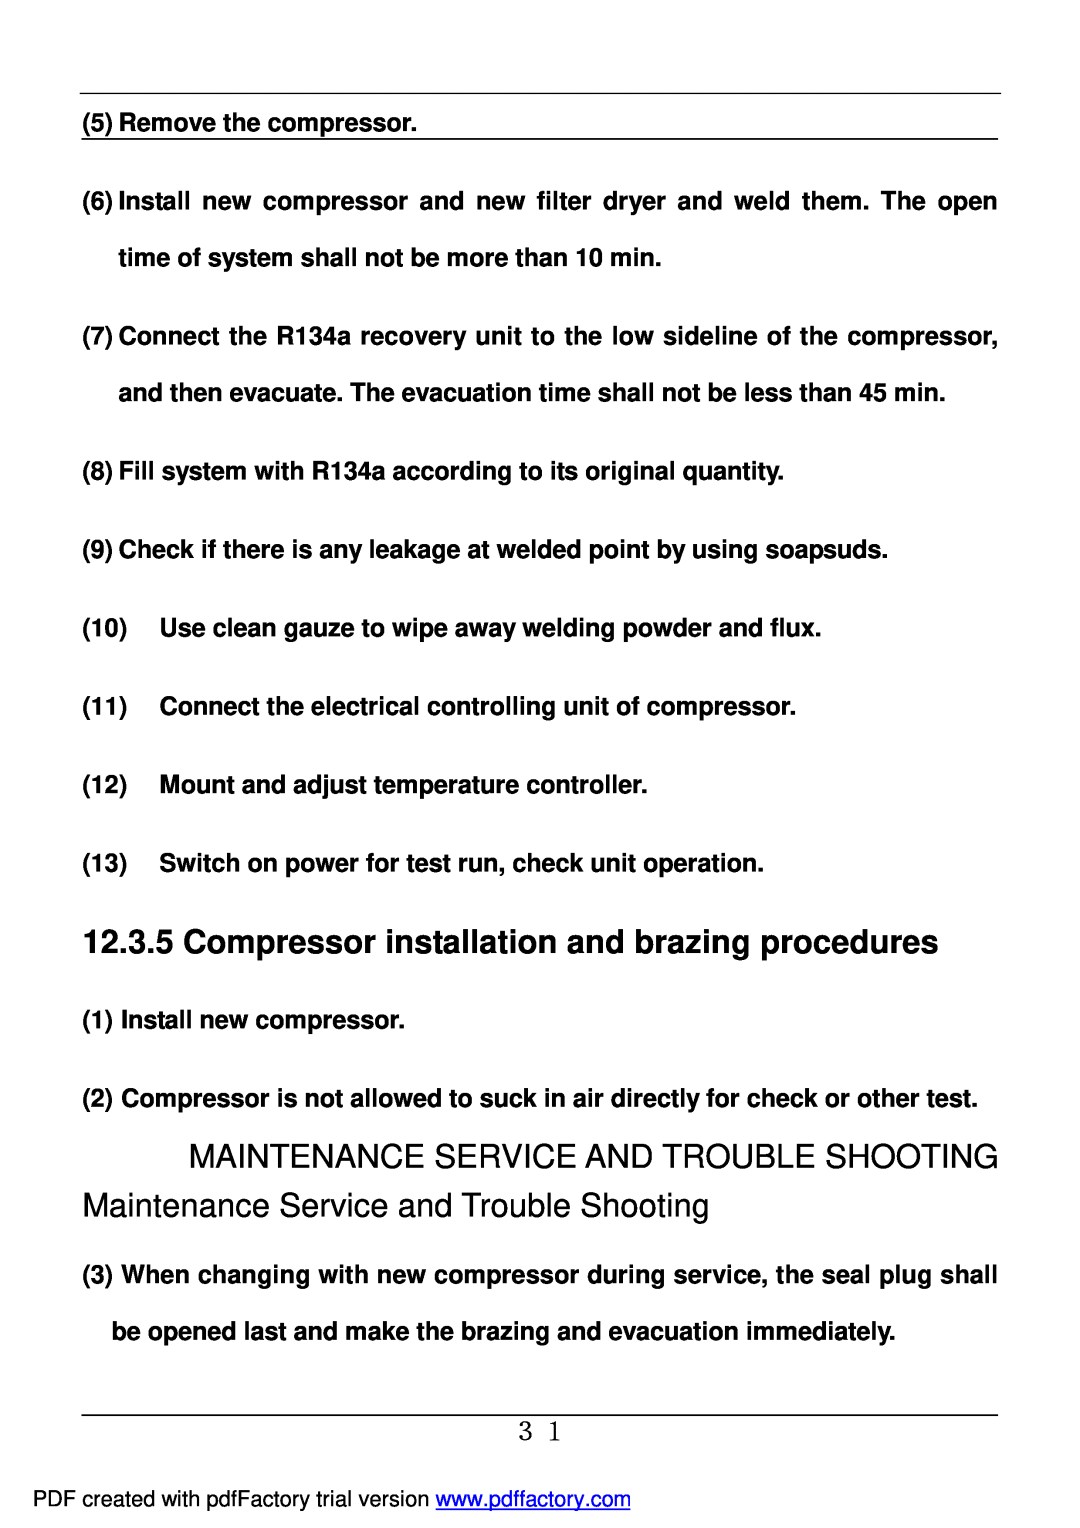 Haier BD-478A service manual Compressor installation and brazing procedures 